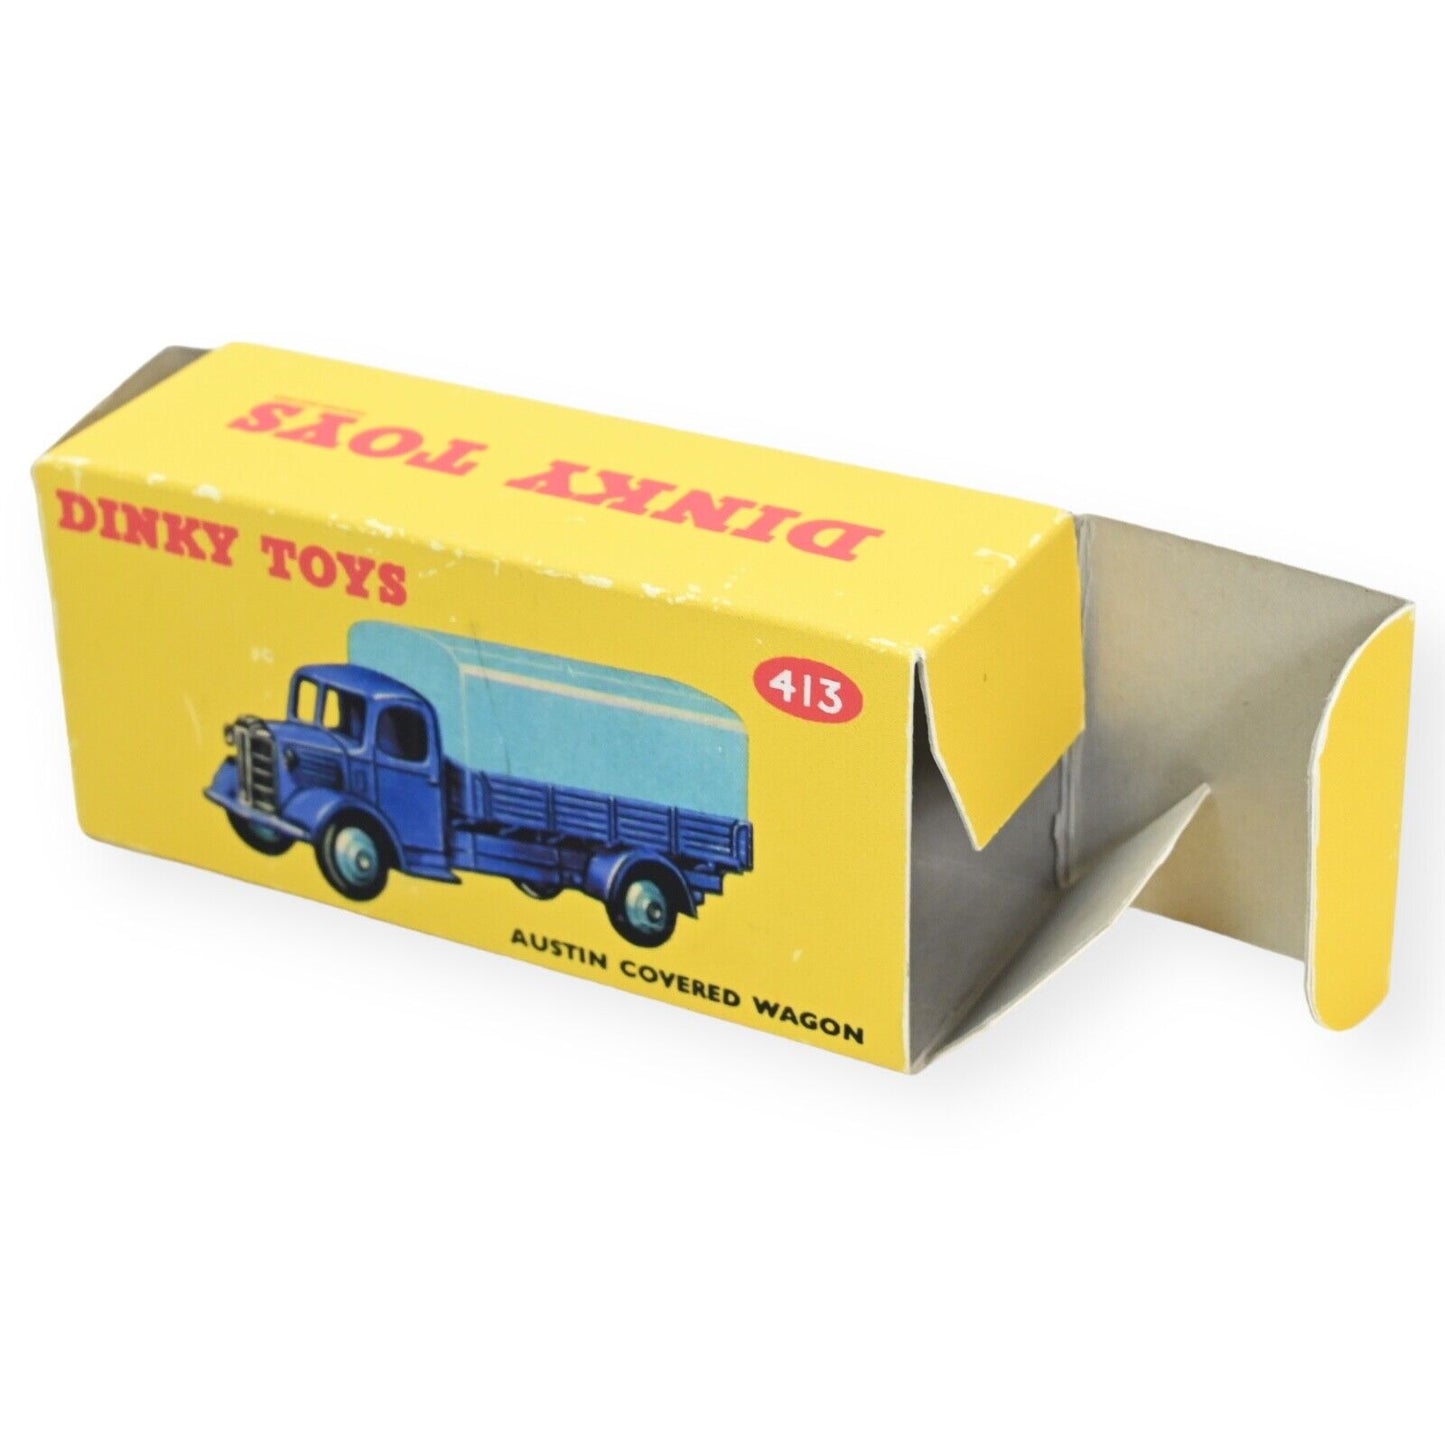 Dinky 413/30s Austin Covered Wagon Blue Cab